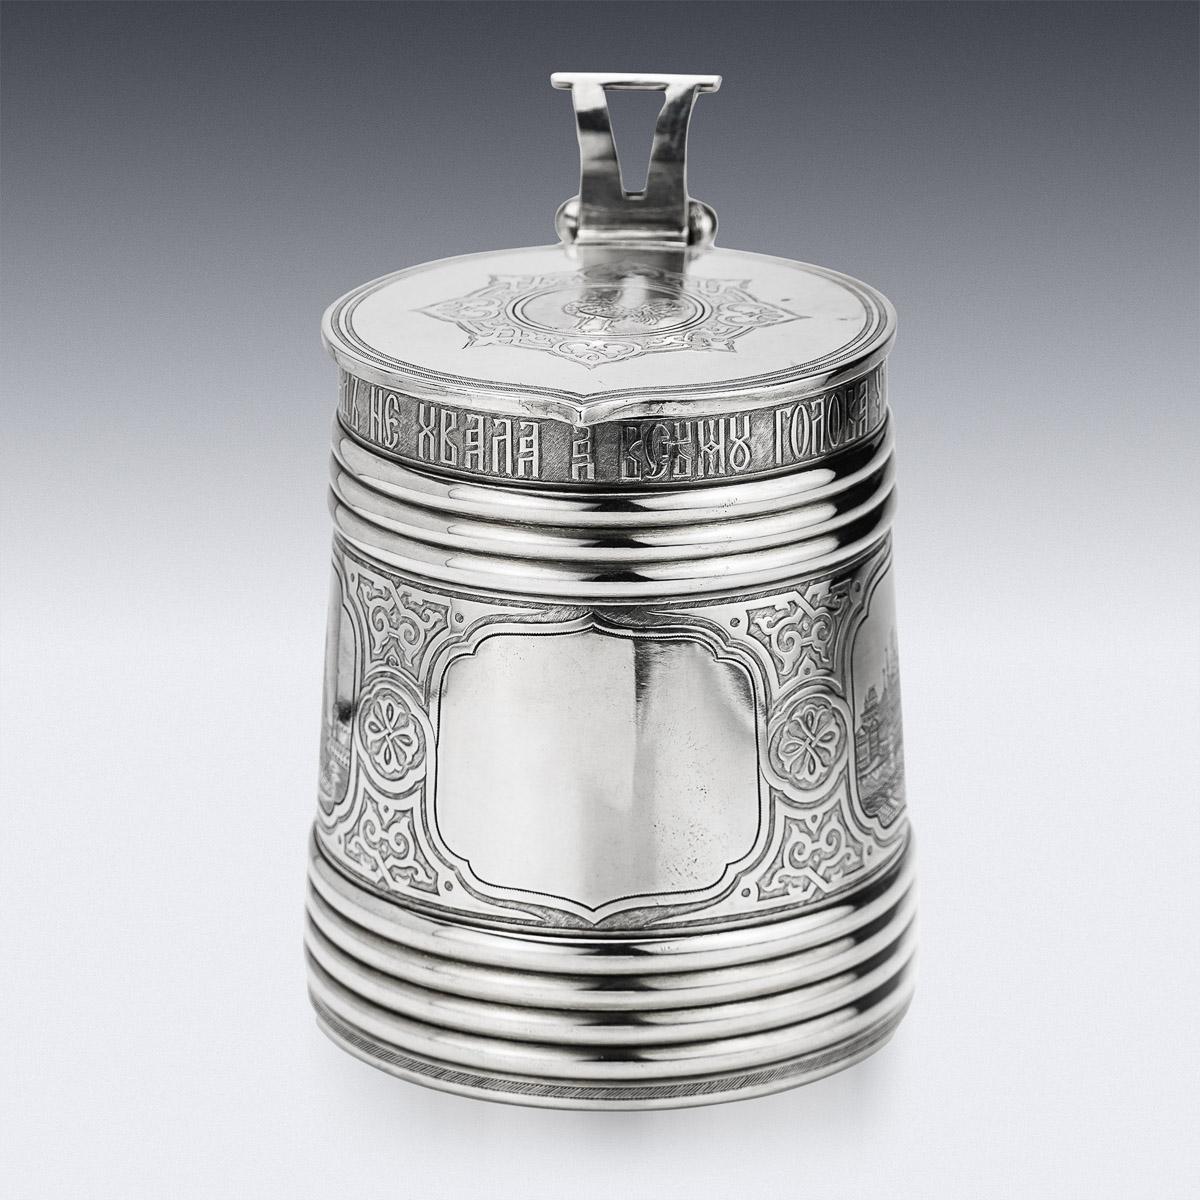 Antique 19th Century Imperial Russian solid silver lidded tankard, parcel gilt, of traditional form, C-shaped handle terminating with a large thumb-piece, engraved depicting famous Moscow landmarks, the sides and top of the lid chased with foliate